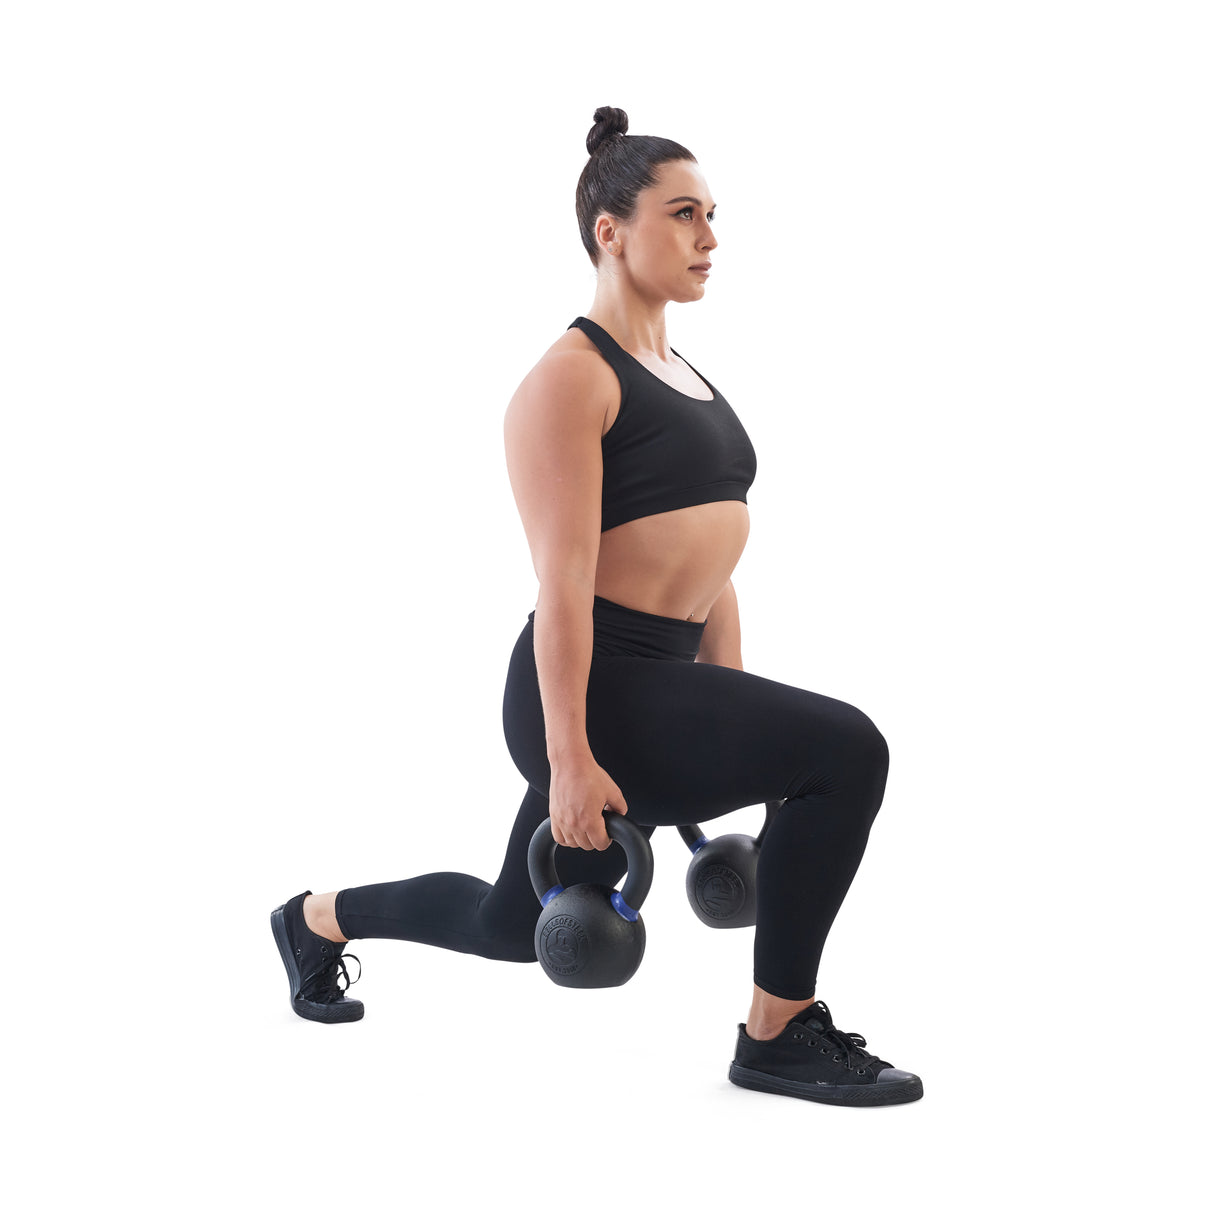 Female athlete doing a lunge with Powder Coated Kettlebells